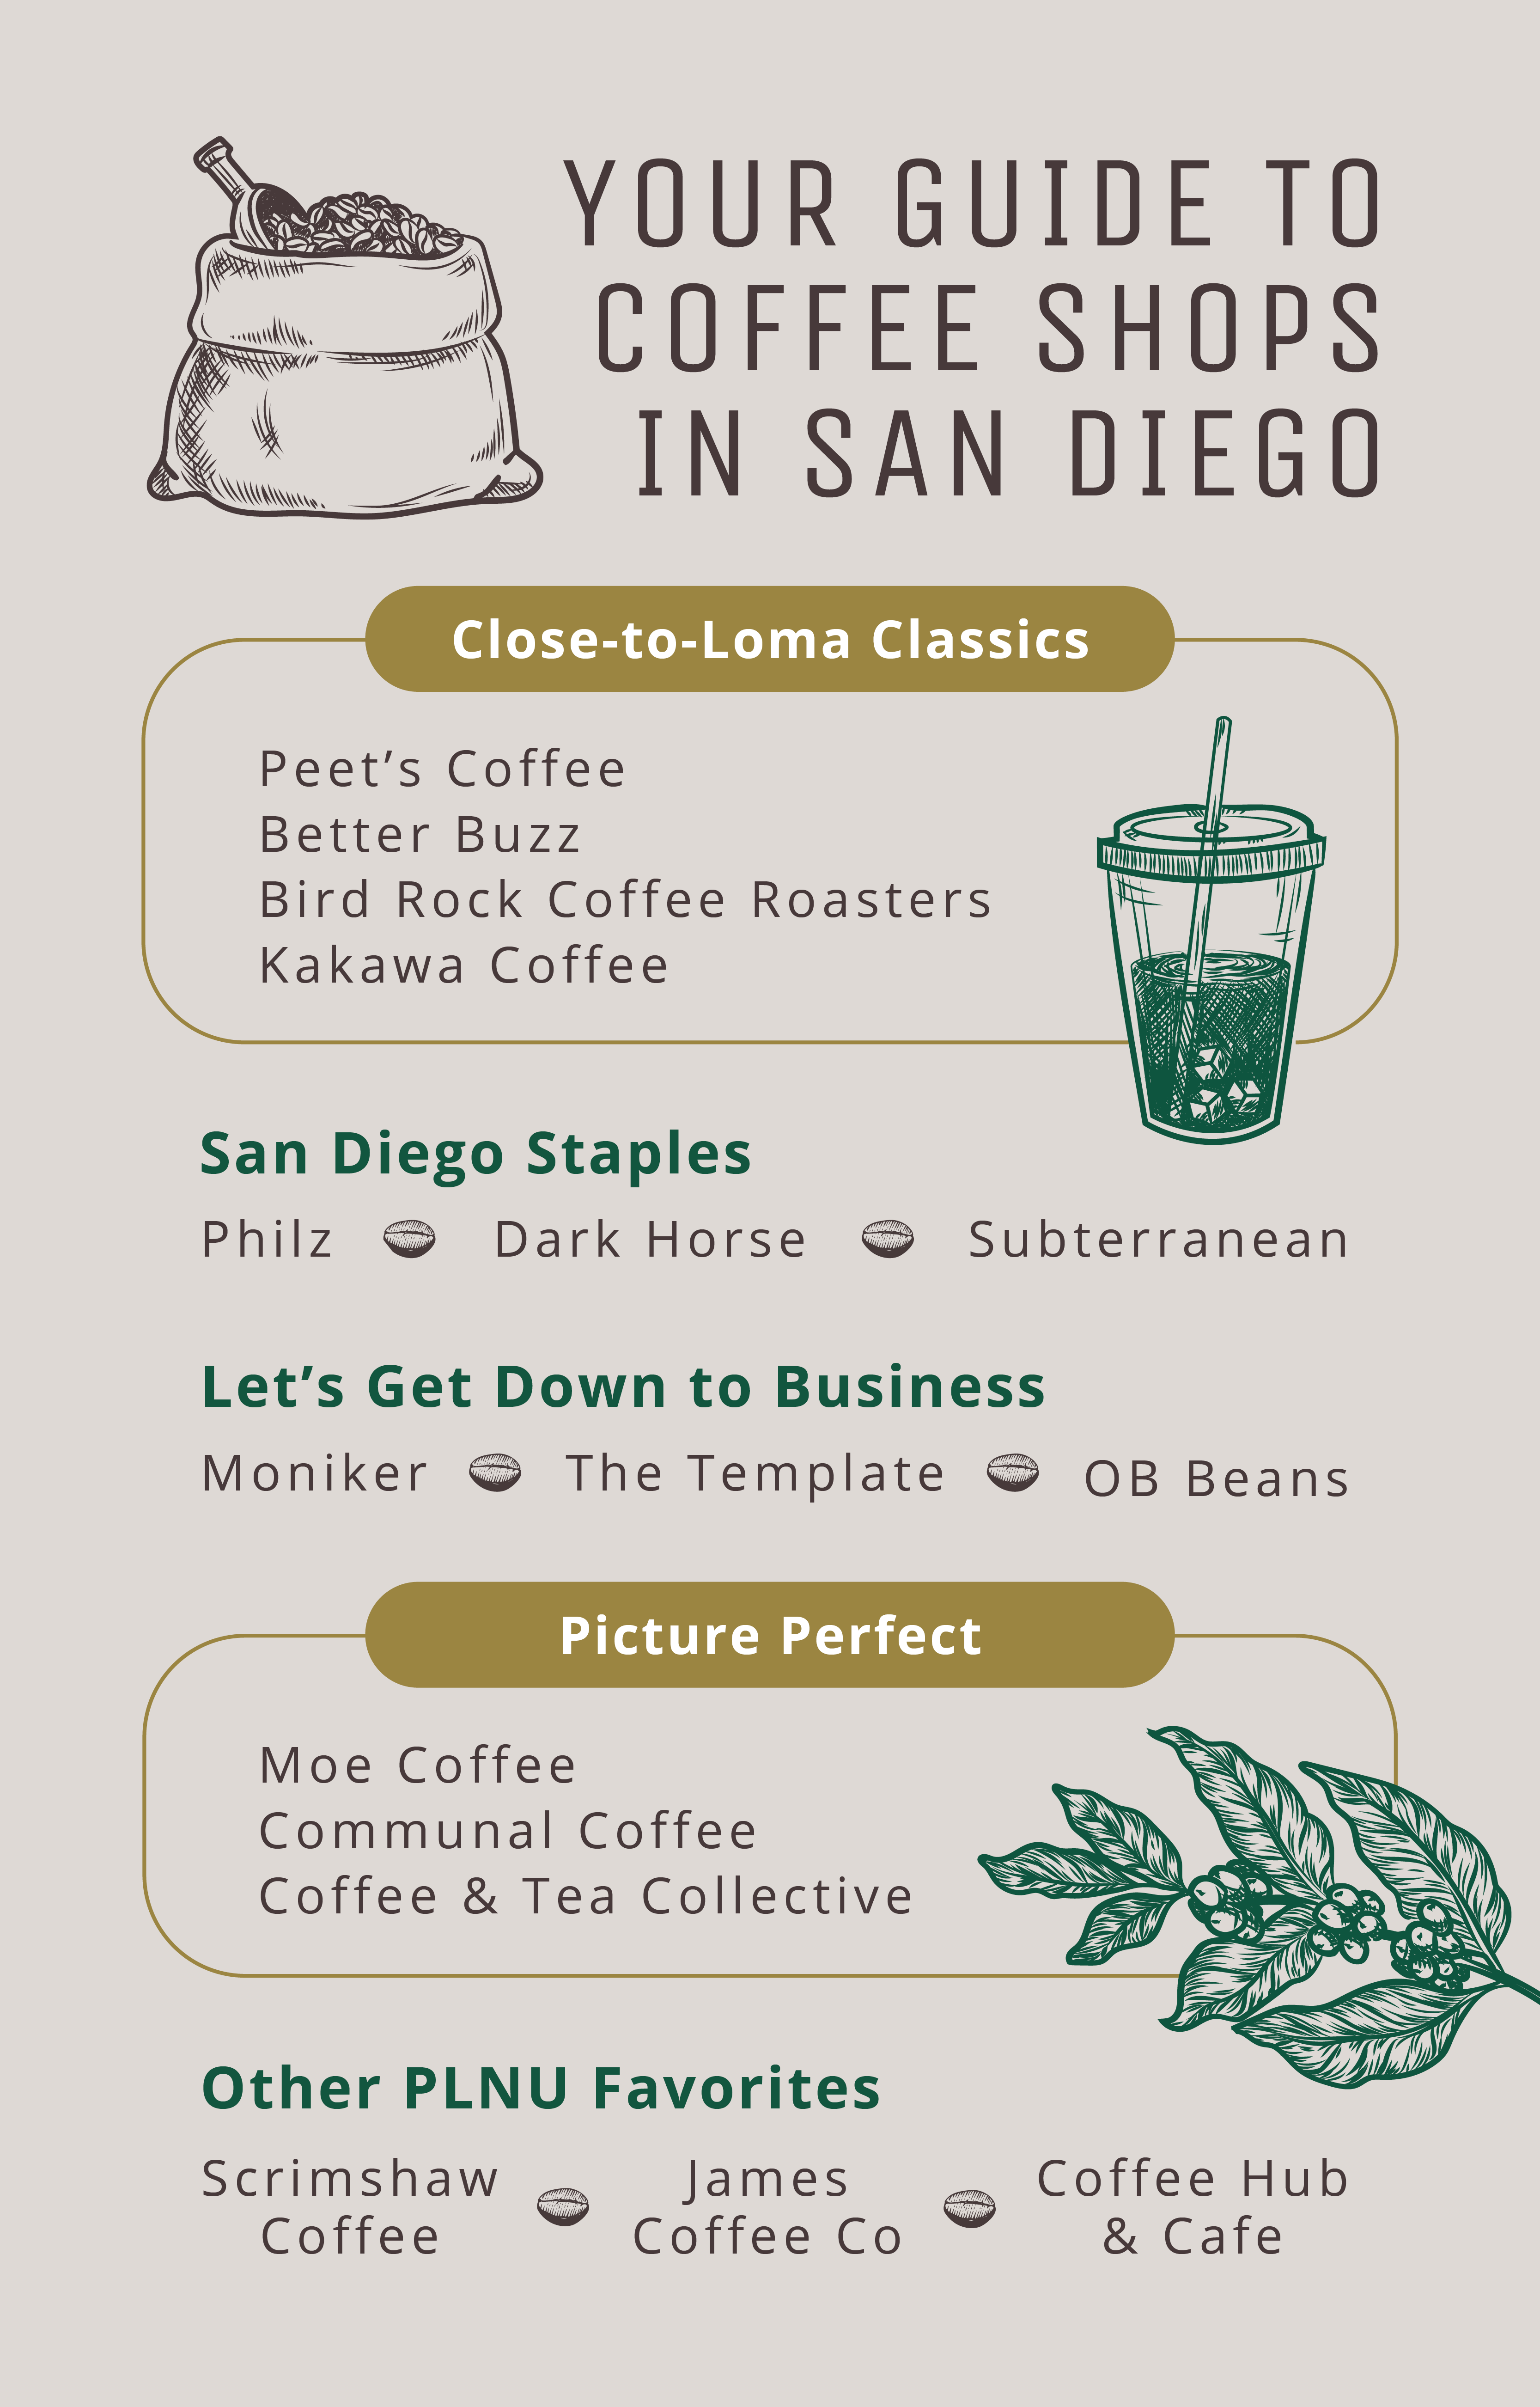 your guide to coffee shops in San Diego. Close-to-Loma Classics: Peet's Coffee, Better Buzz, Bird Rock Coffee Roasters, Kakawa Coffee. San Diego Staples: Philz, Dark Horse, Subterranean. Picture Perfect: Moe Coffee, Communal Coffee, Coffee & Tea Collective. Other PLNU Favorites: Scrimshaw coffee, James Coffee Co Coffe Hub & Cafe. Images of a bag of coffee beans, a plastic cup filled with iced coffee and a coffee plant.